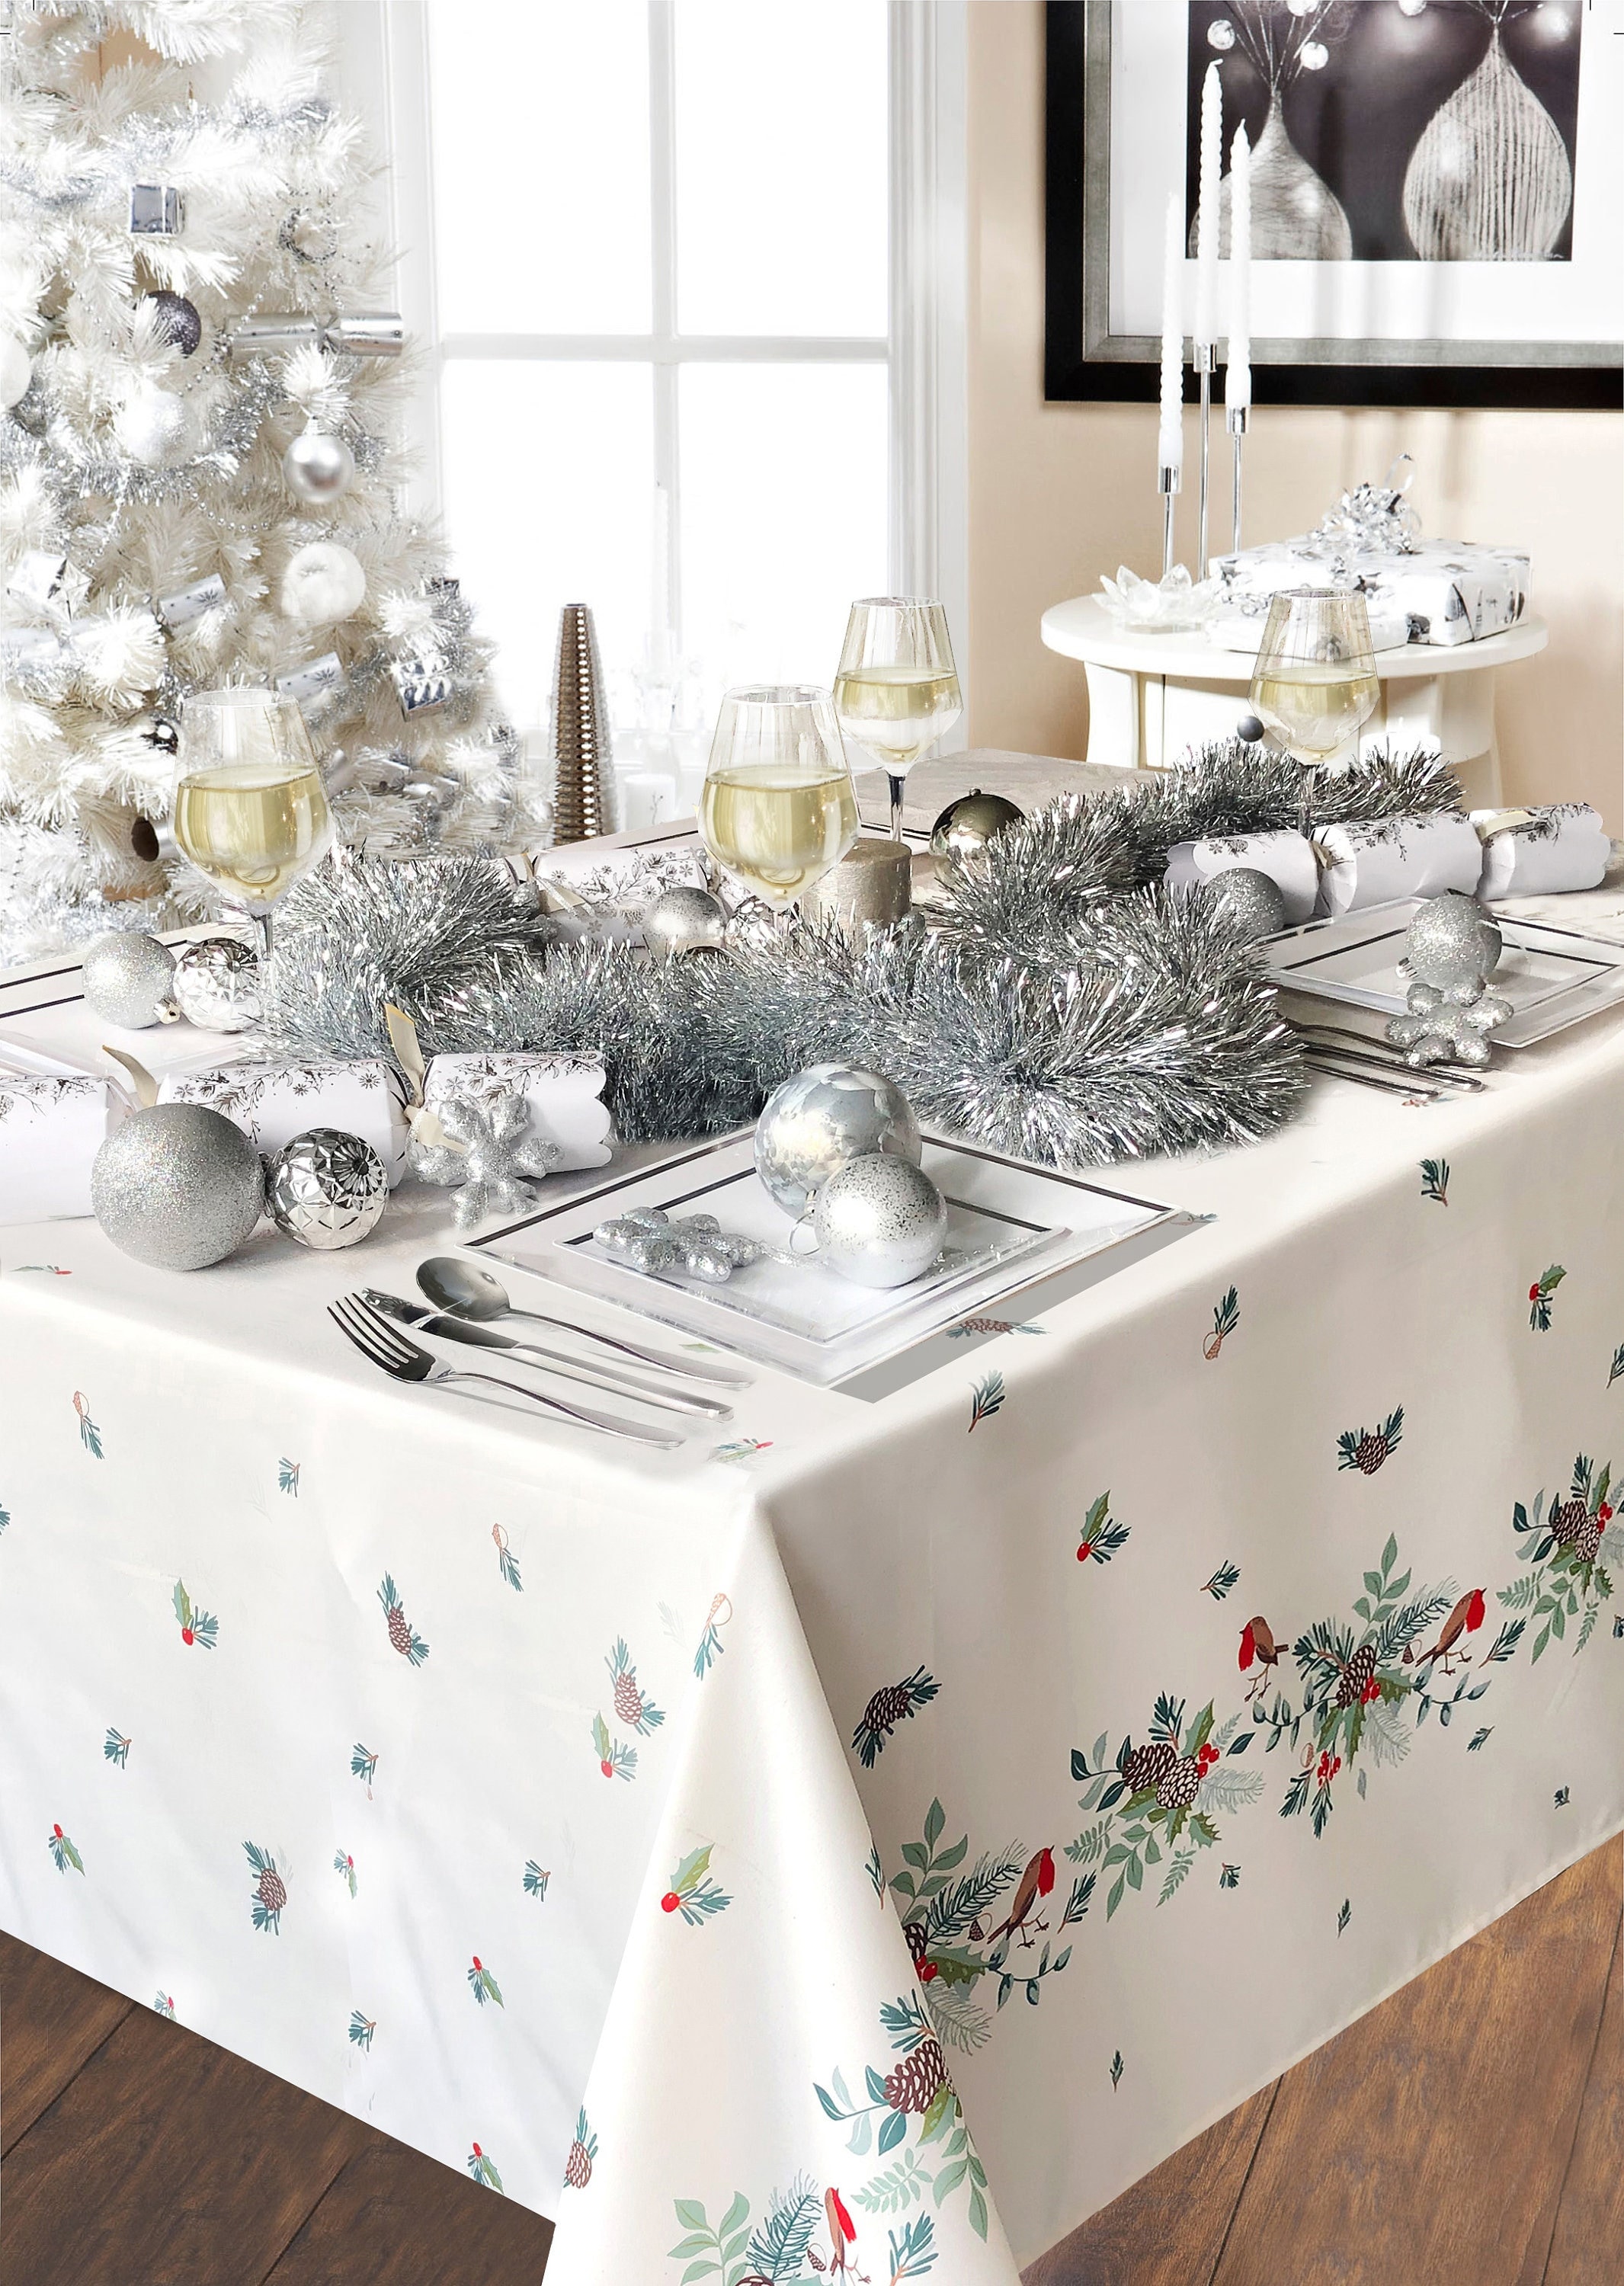 Christmas Snowman Snowflake Robin Wedding Decorations Coffee Table Decor  Tablecloth Table Kitchen Decorative Table Runner - AliExpress